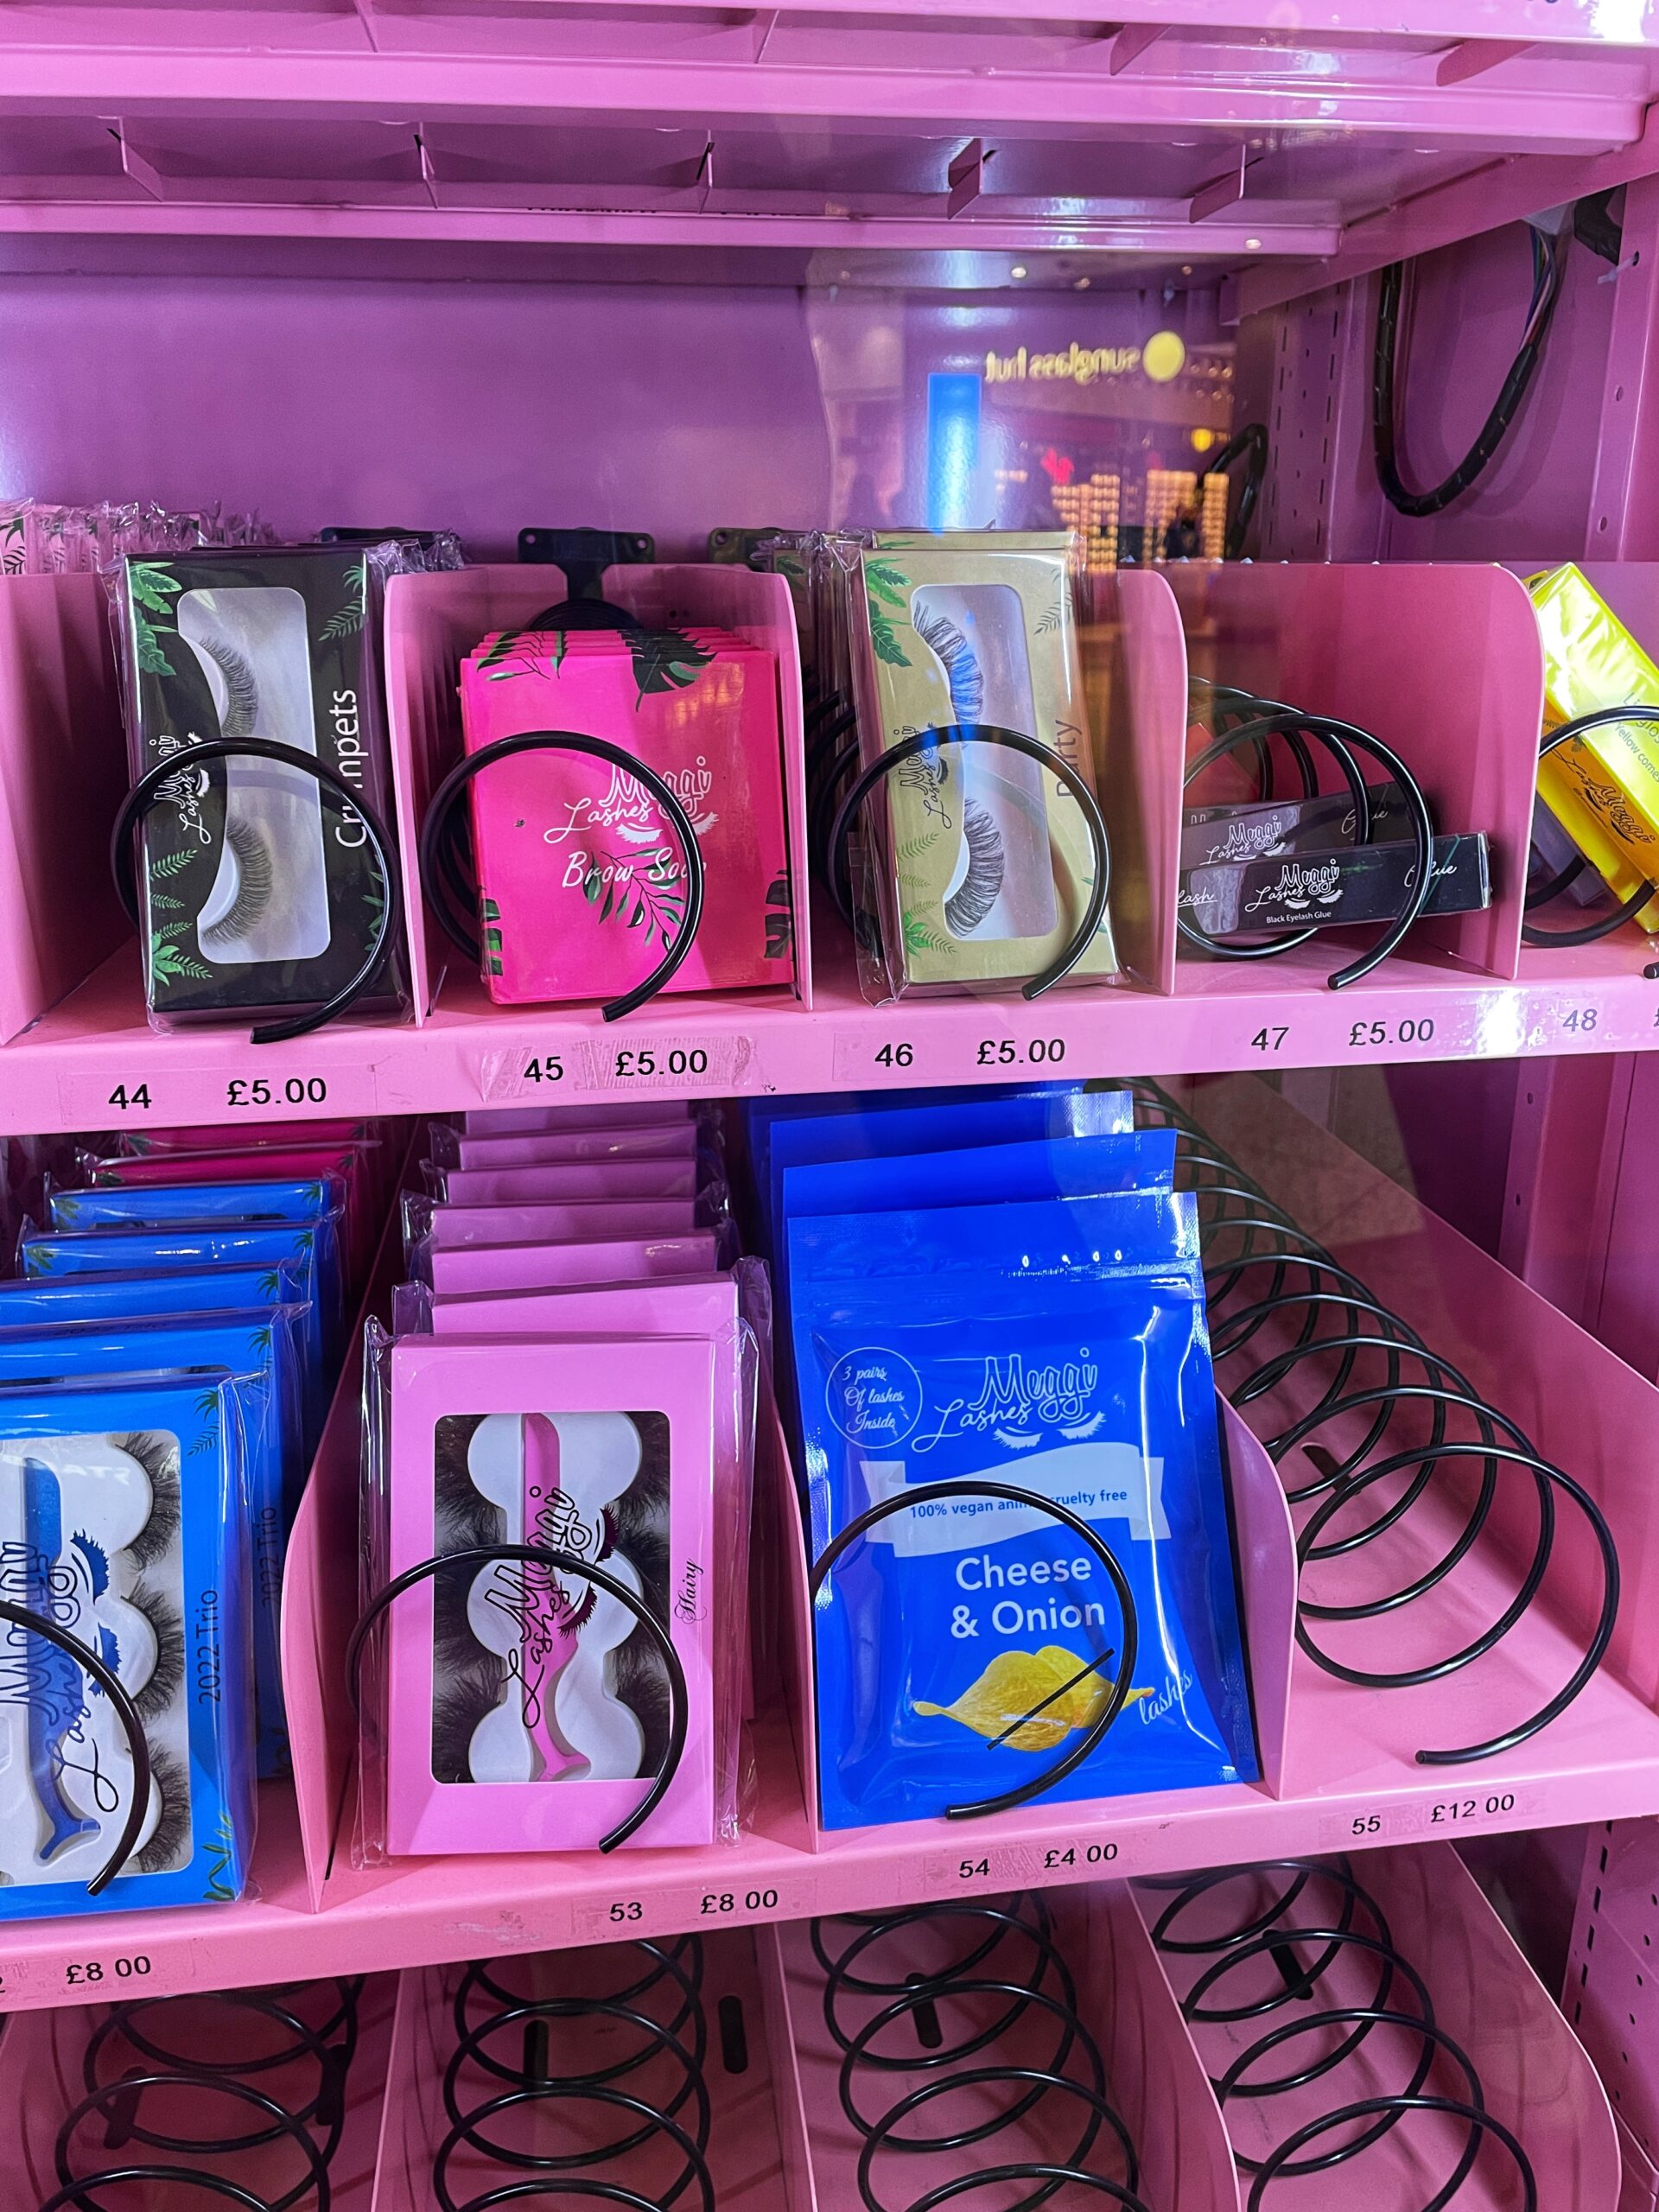 A vending machine selling false lashes in the Manchester Arndale